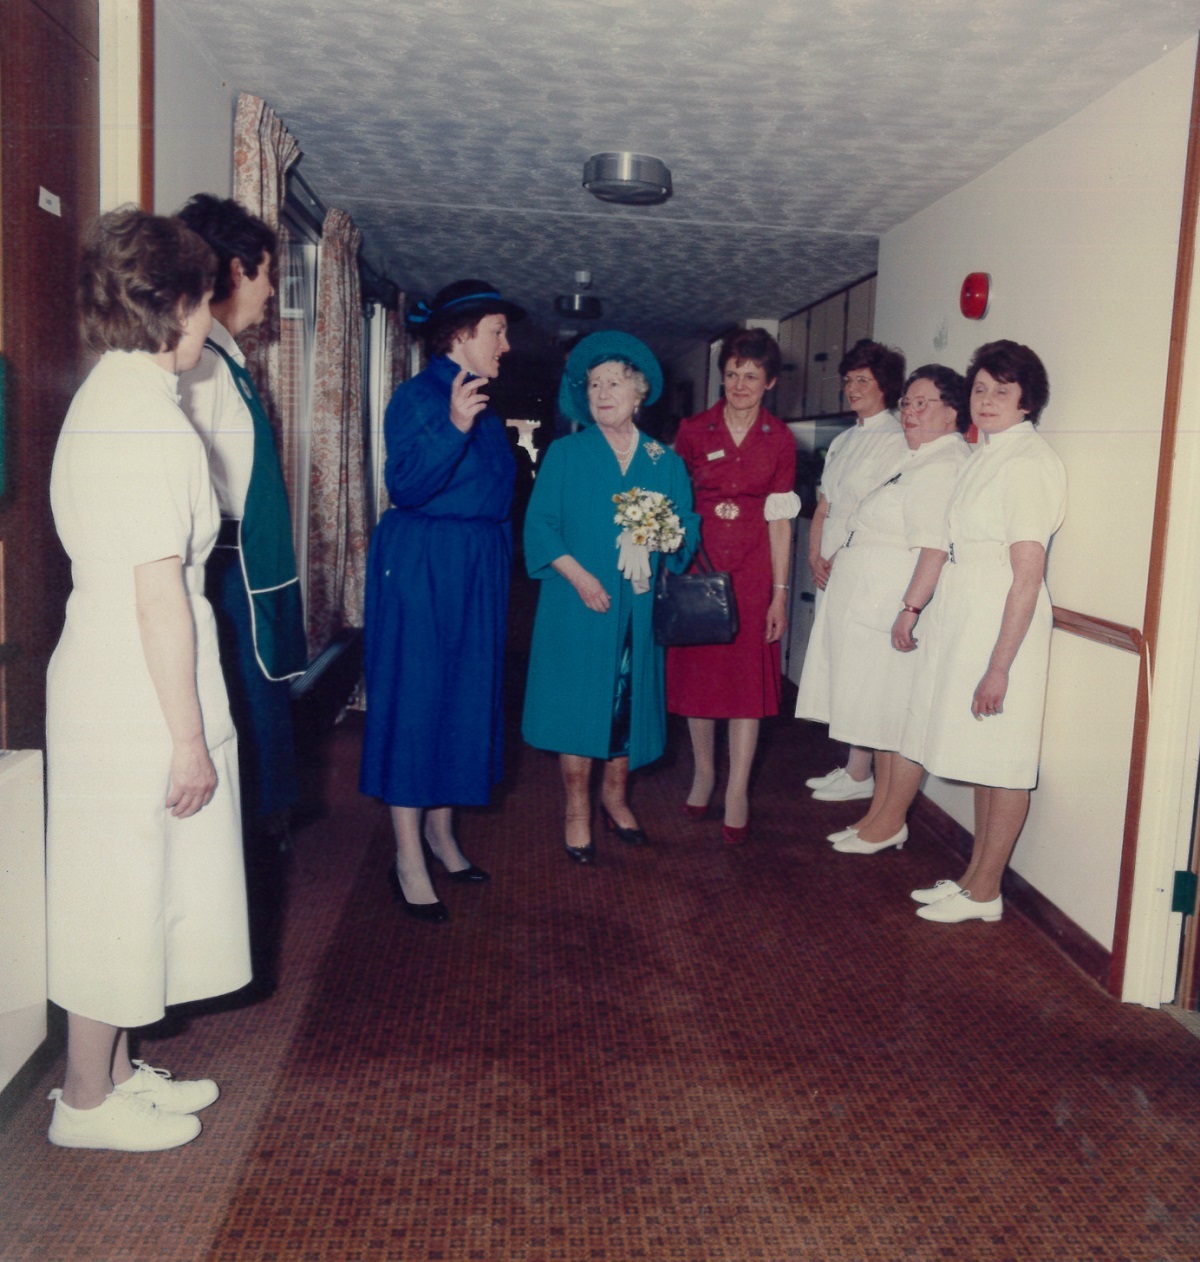 Official unveiling - Dr Elizabeth Hall, one of the hospice’s founders and then first medical director, gives the Queen Mother a tour of the new hospice and introduces some of the nurses during the official opening in April 1986